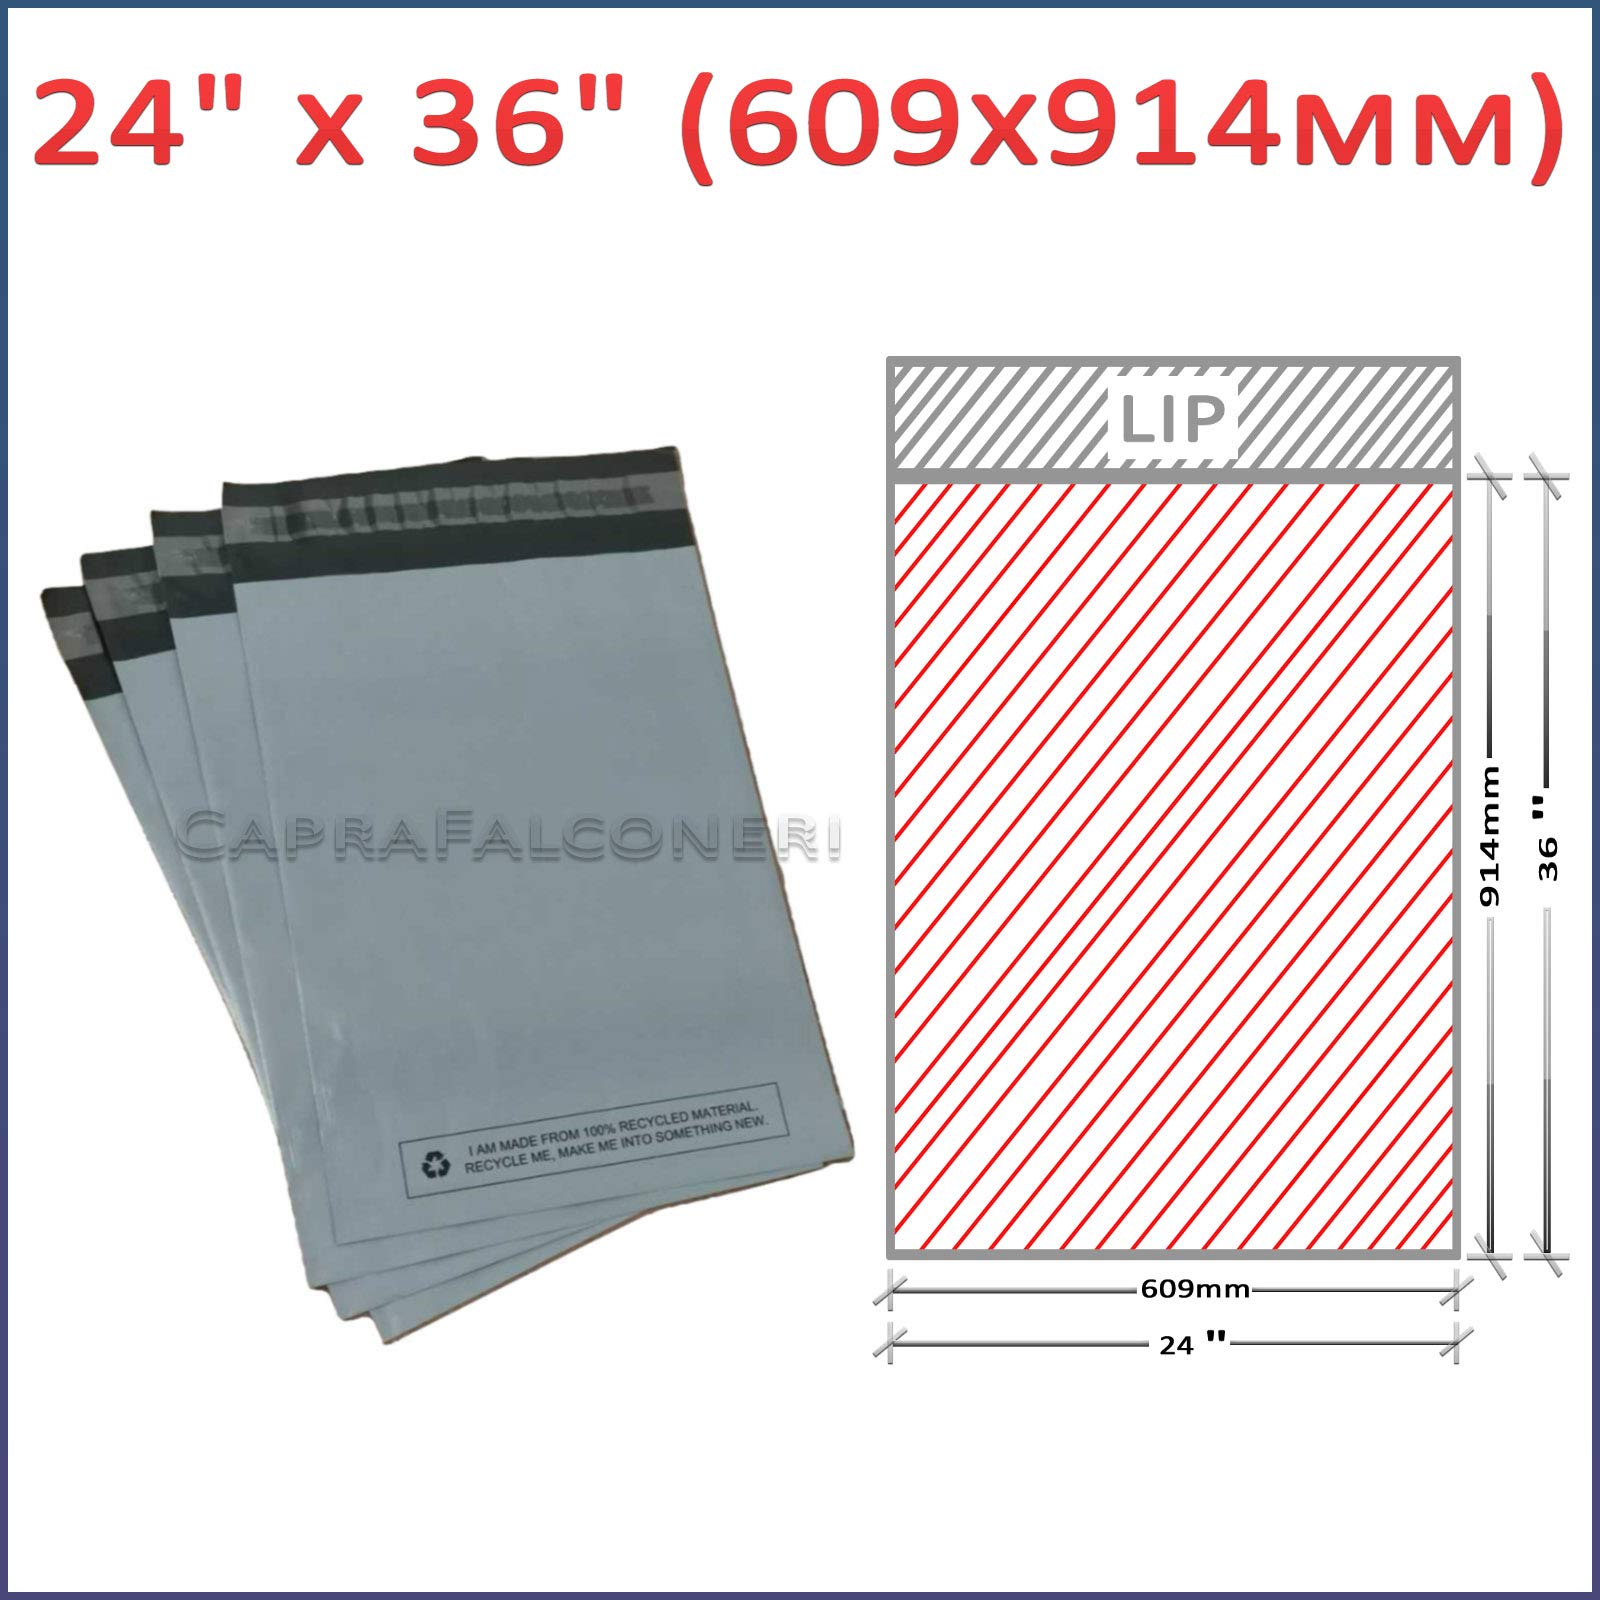 Large 5X Grey Mailing Bags 24 inches x 36 inches Polythene Self Seal Big Plastic Envelopes 100% Recyclable Strong Packaging Bags - Parcel Postal Postage Packaging Bags